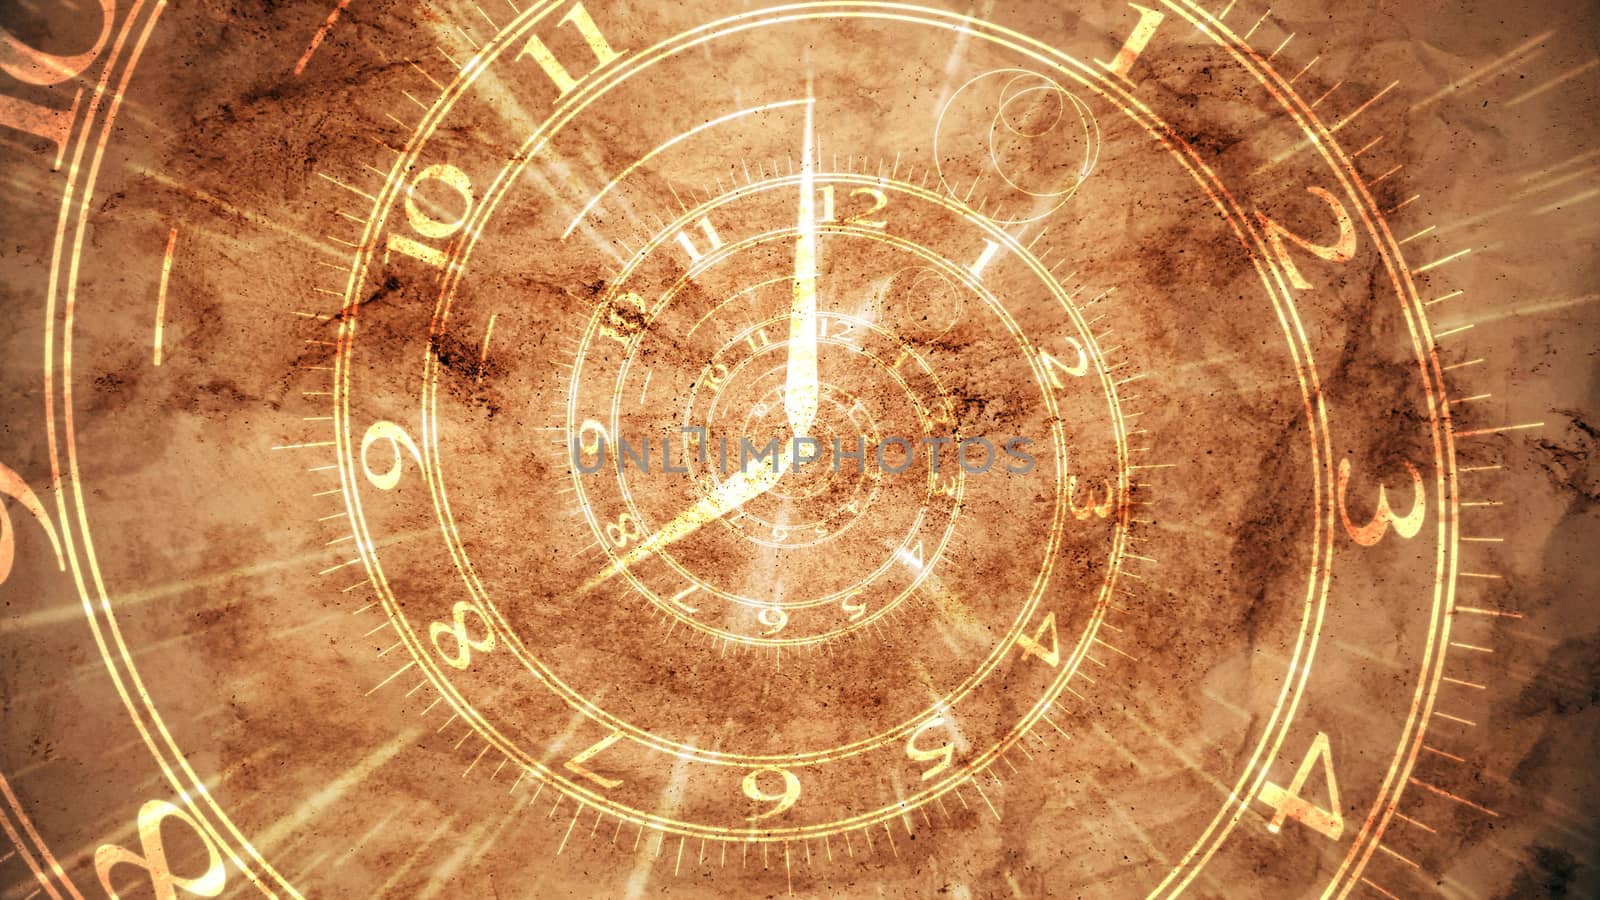 Impressive 3d illustration of old spiral clock with golden Arabic numbers written on a light brown pergament. It reminds about life events moving along a spiral.